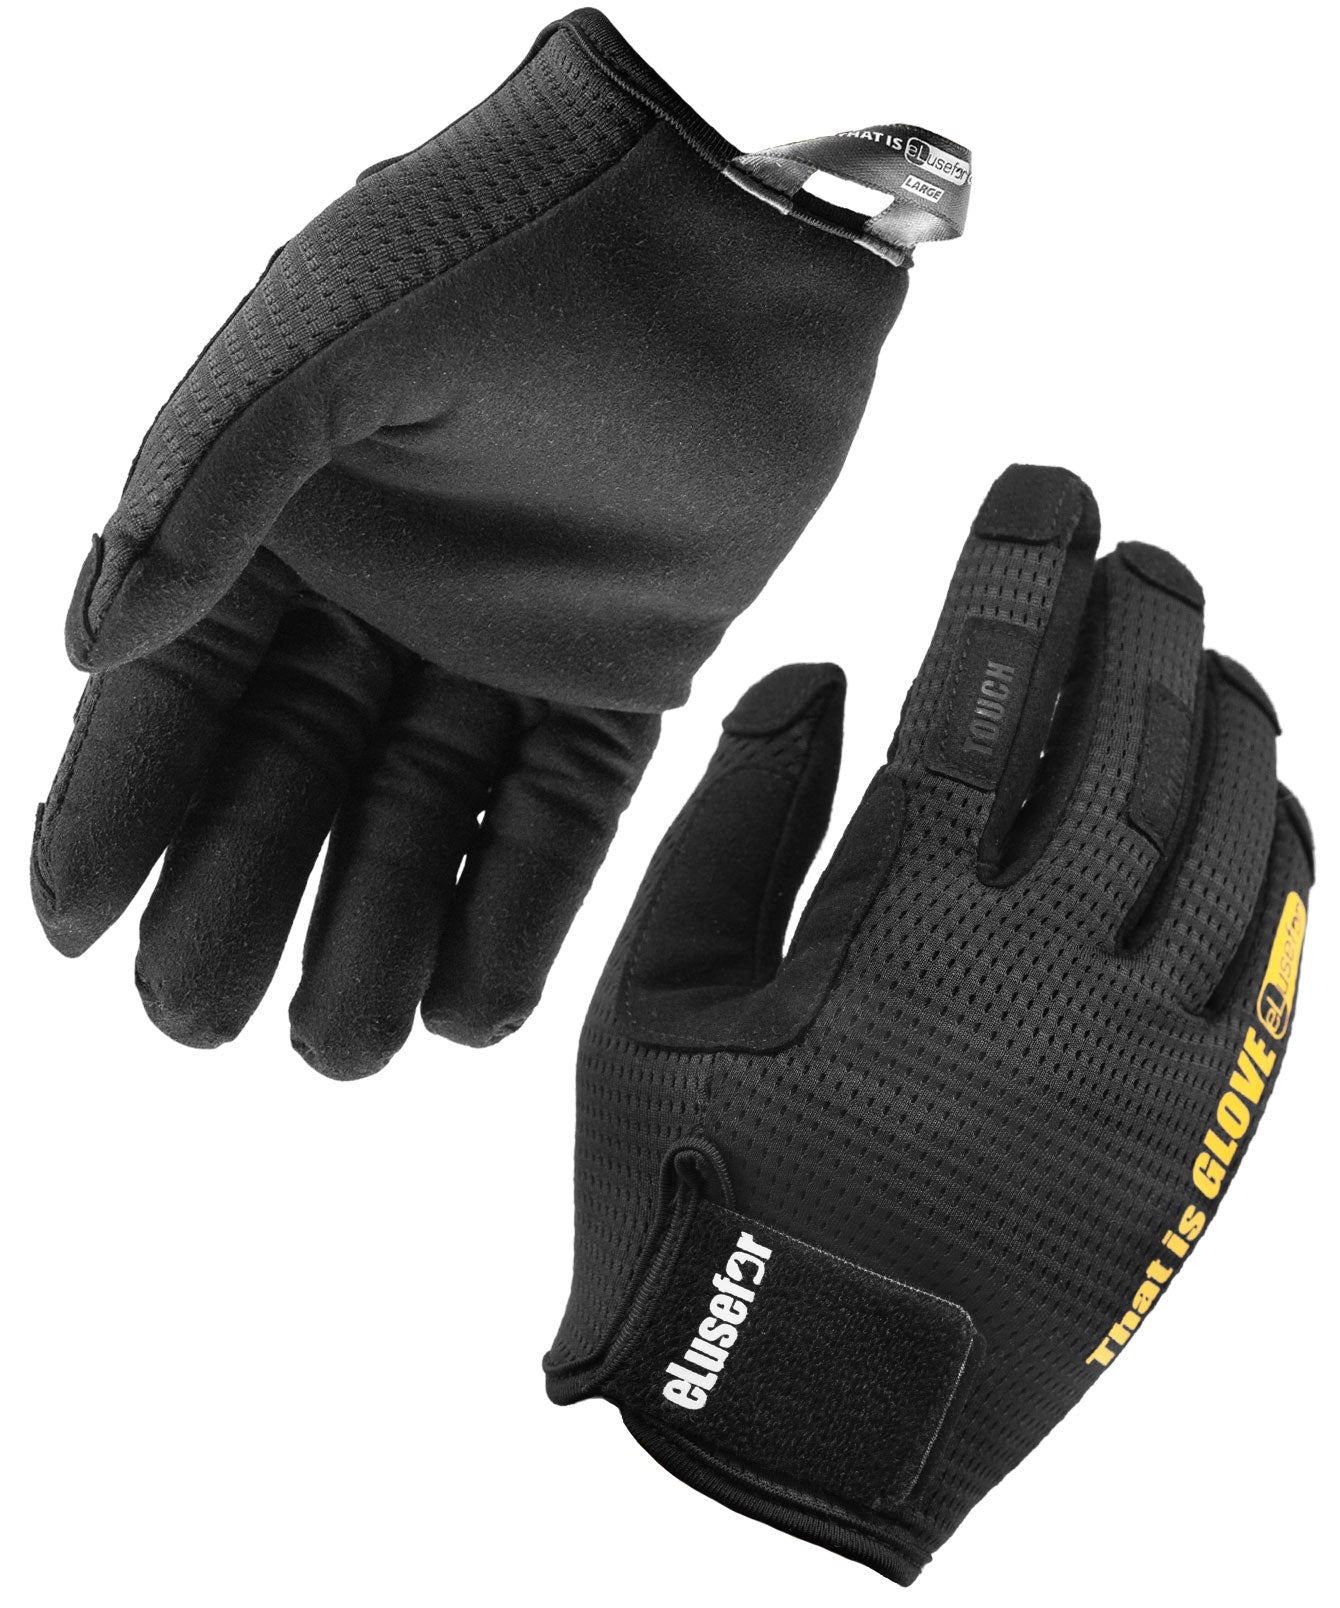 ControllerUltra Work Gloves - Ultra Durable, Stable Performance, 2Way Touch, BadgeFlex for Add-on Badges, Black